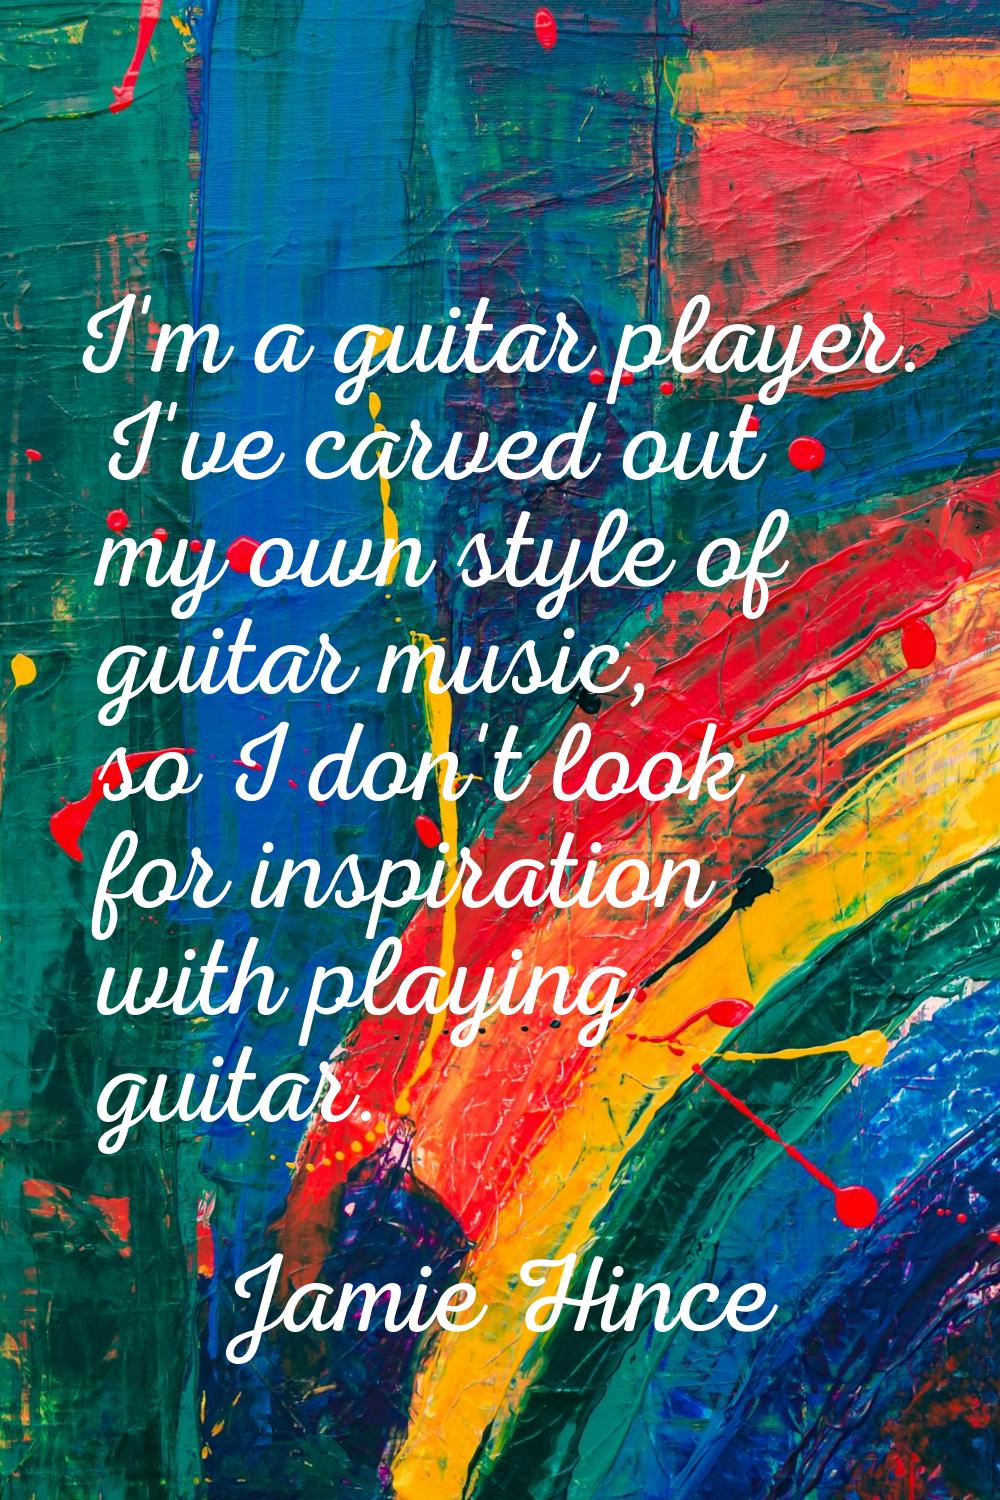 I'm a guitar player. I've carved out my own style of guitar music, so I don't look for inspiration 